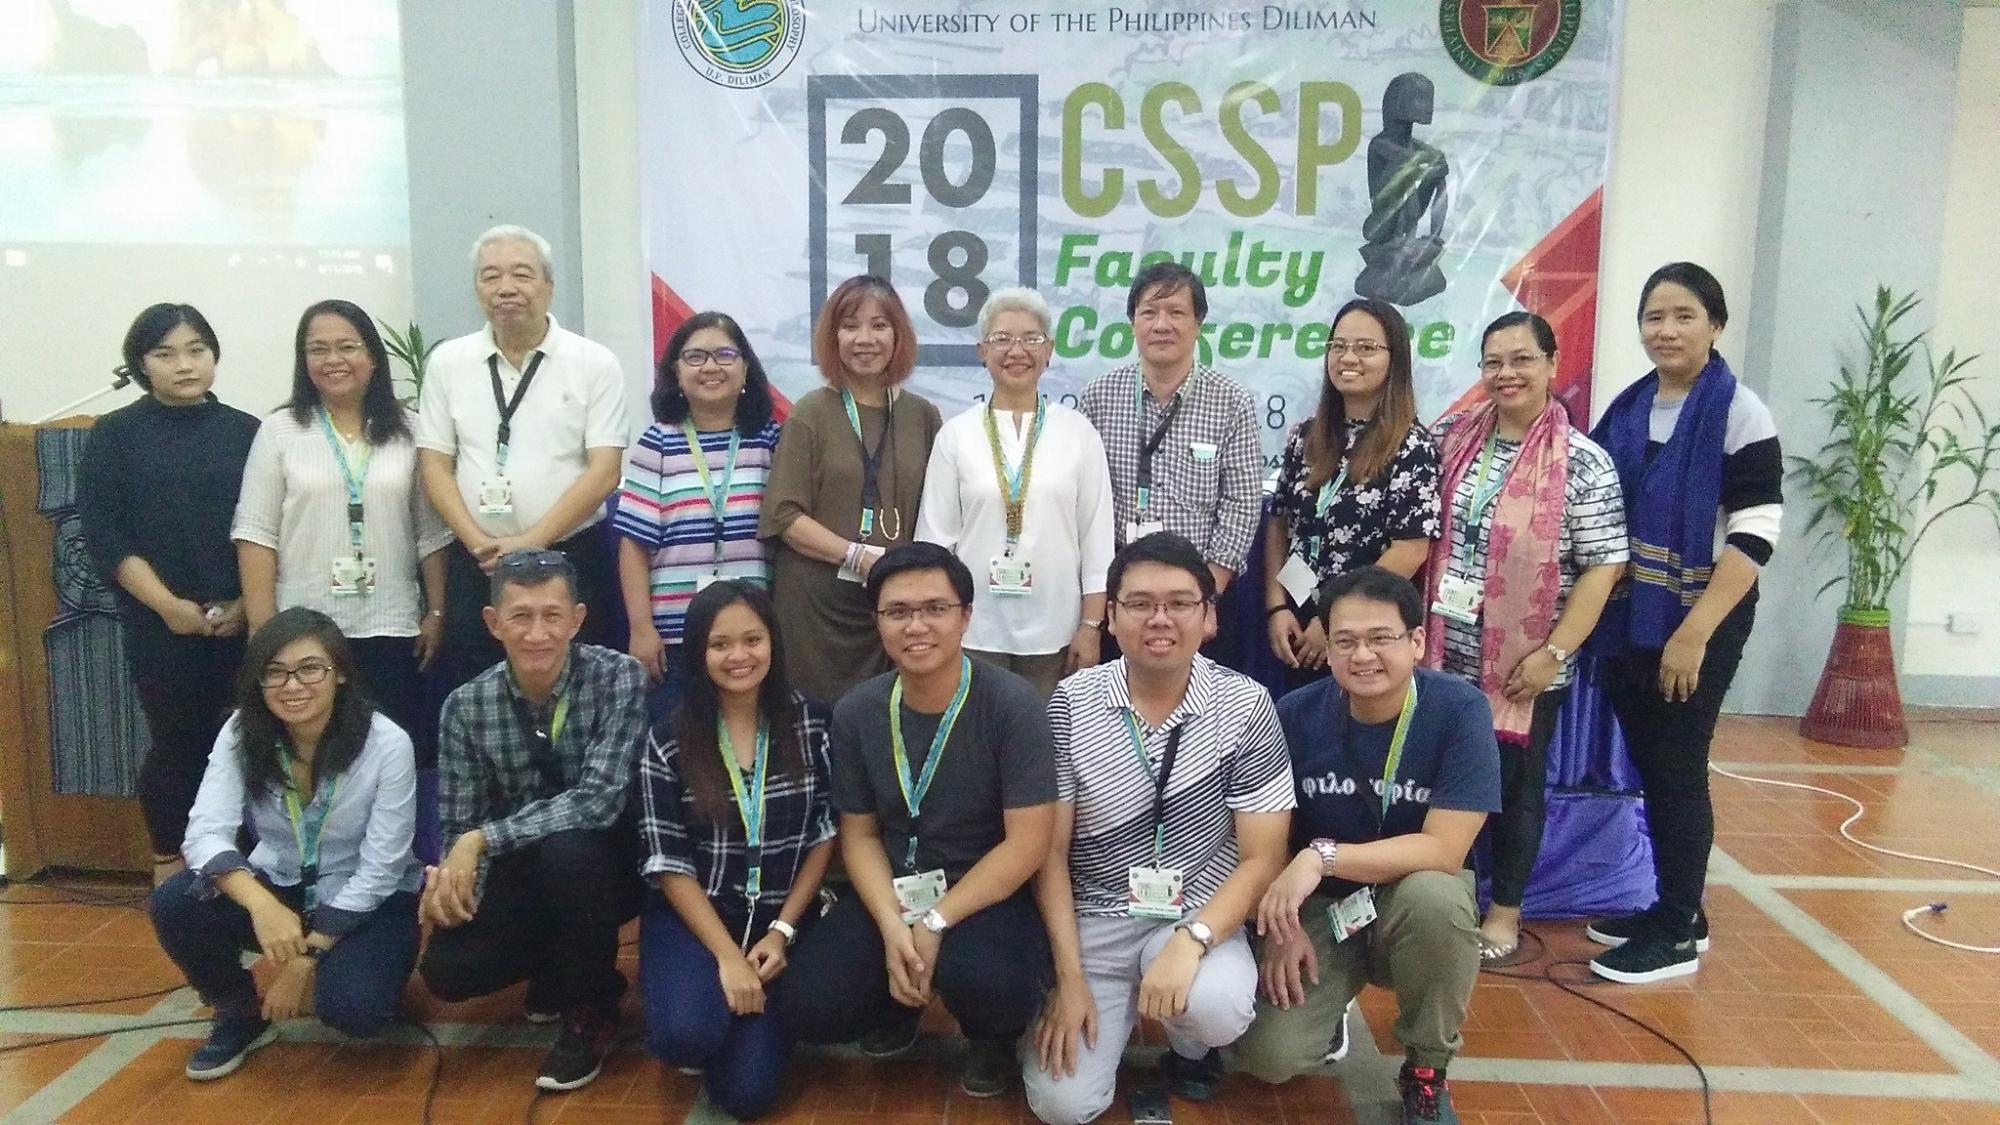 The faculty at the 2018 CSSP Faculty Conference